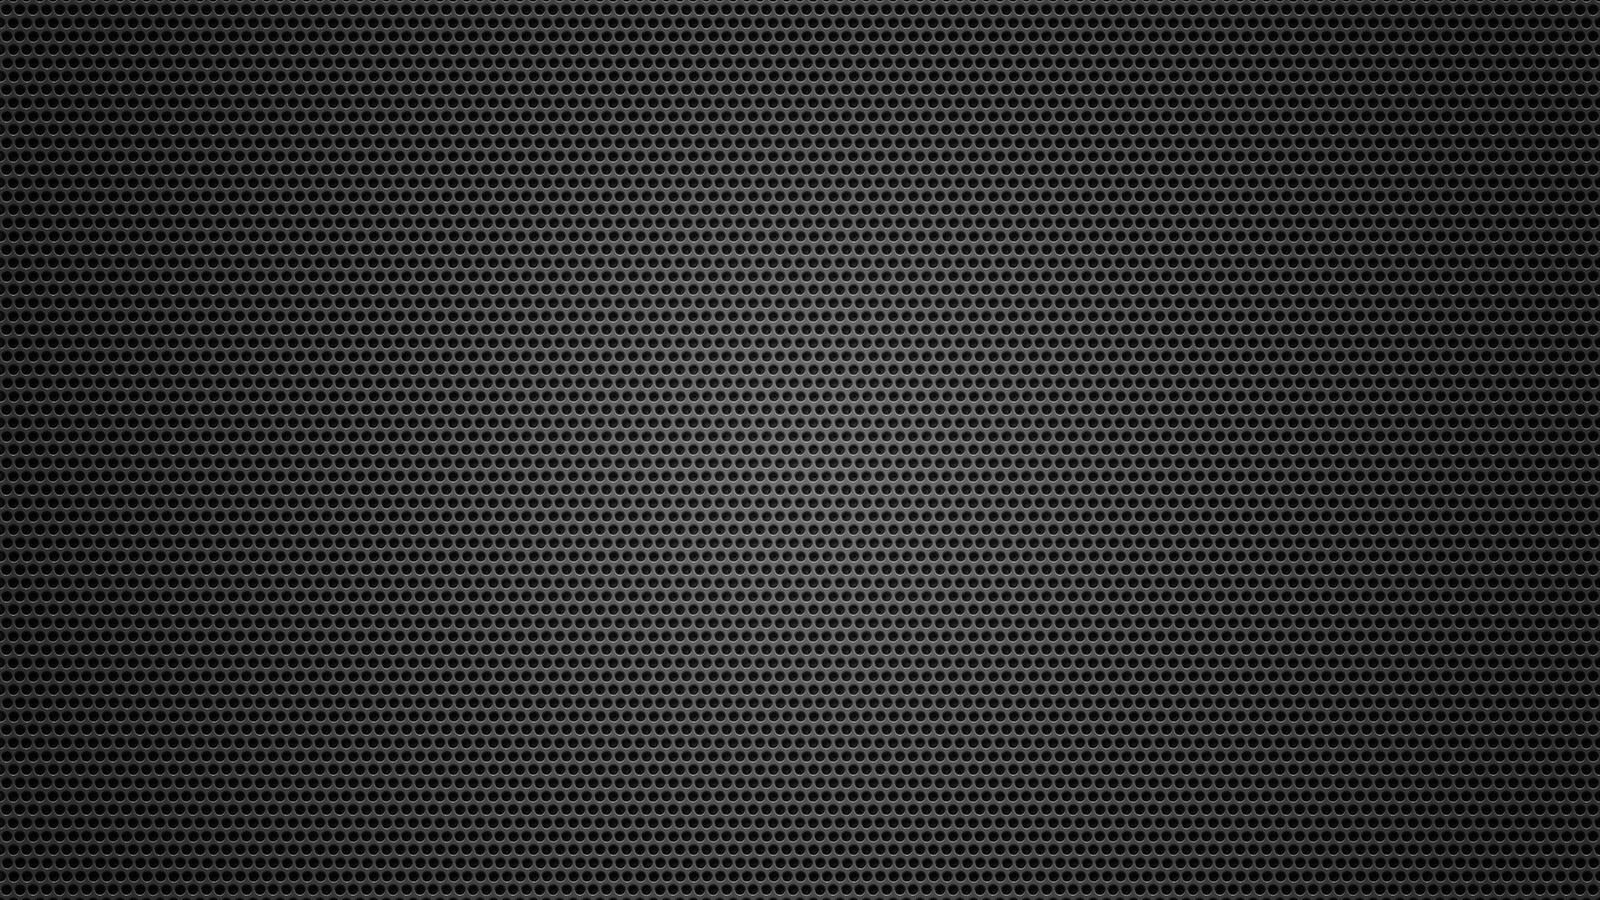 Wallpapers material black and white circles on the desktop